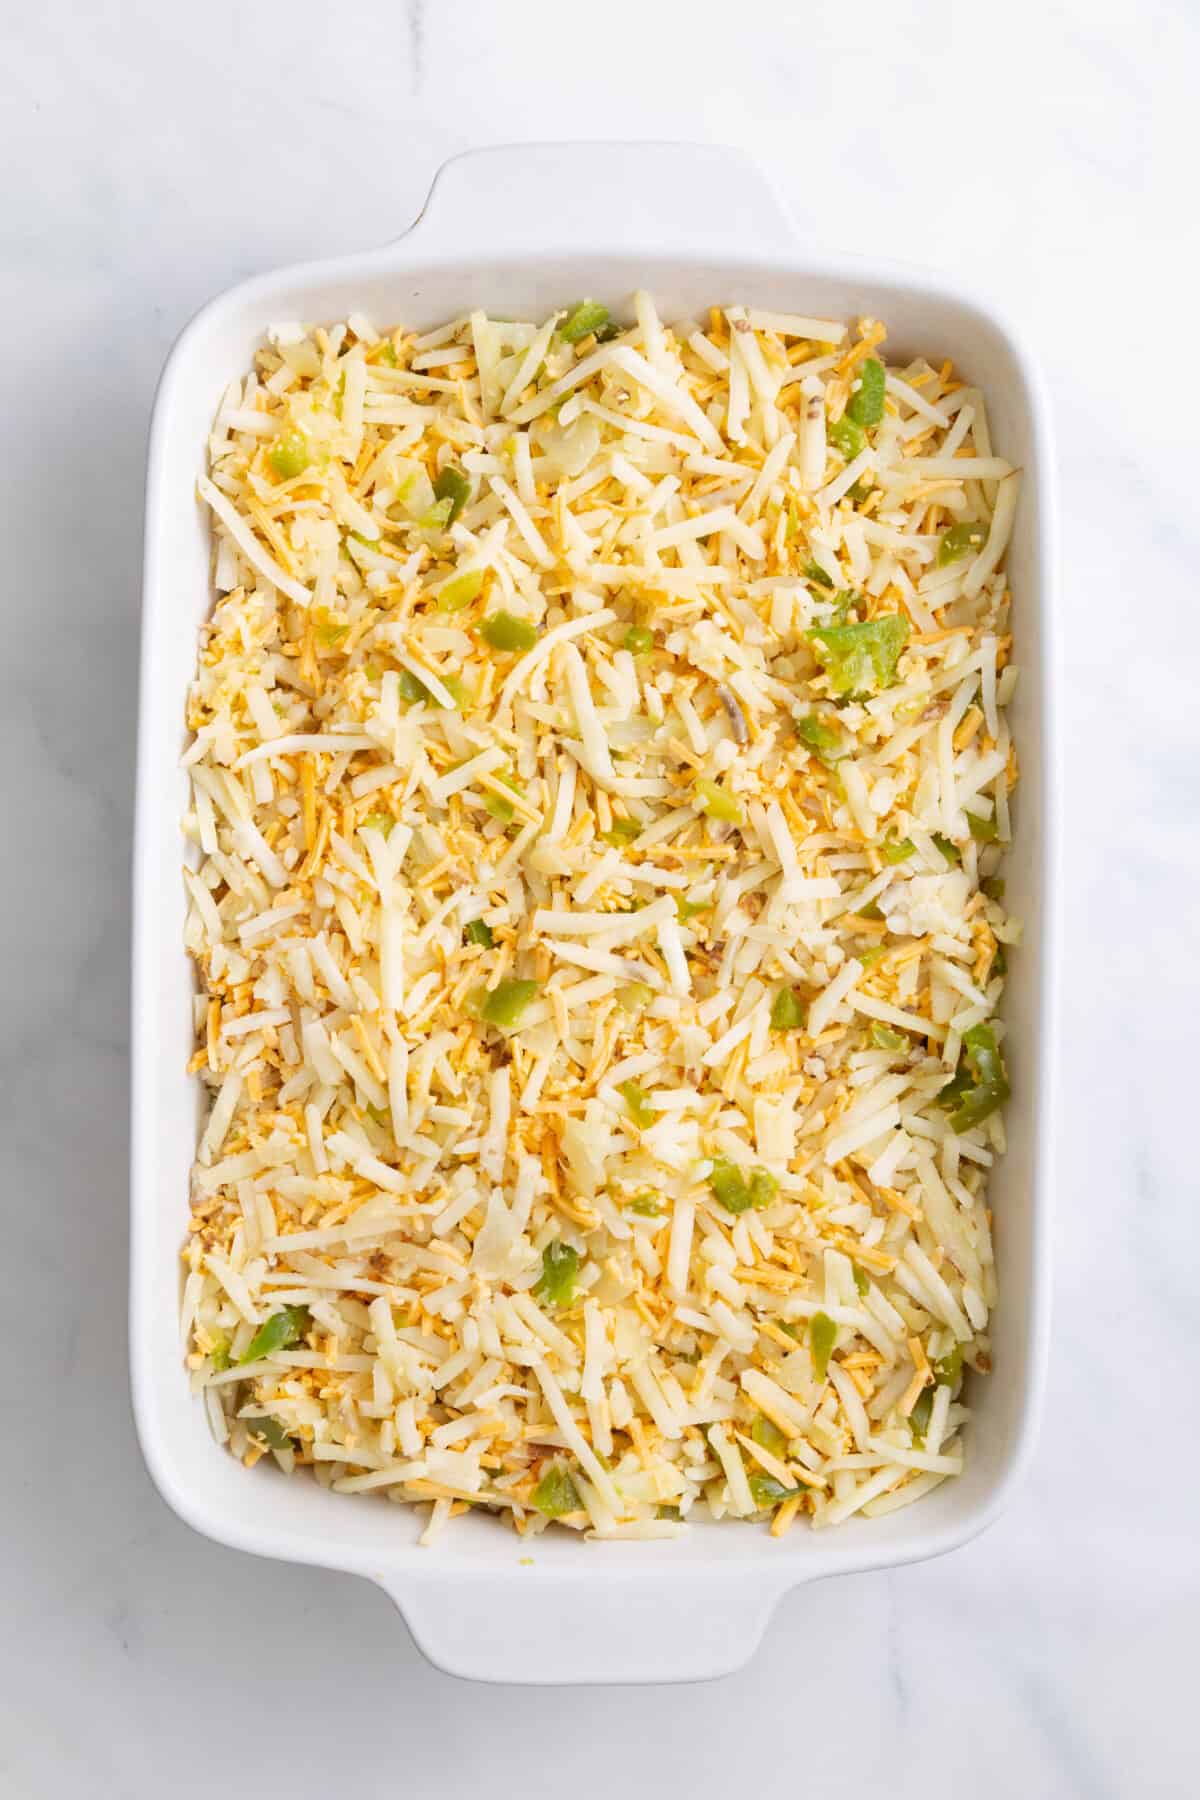 step 2 to make cheesy breakfast potato casserole, layer mixture and shredded cheese into a 9x12 inch casserole dish.